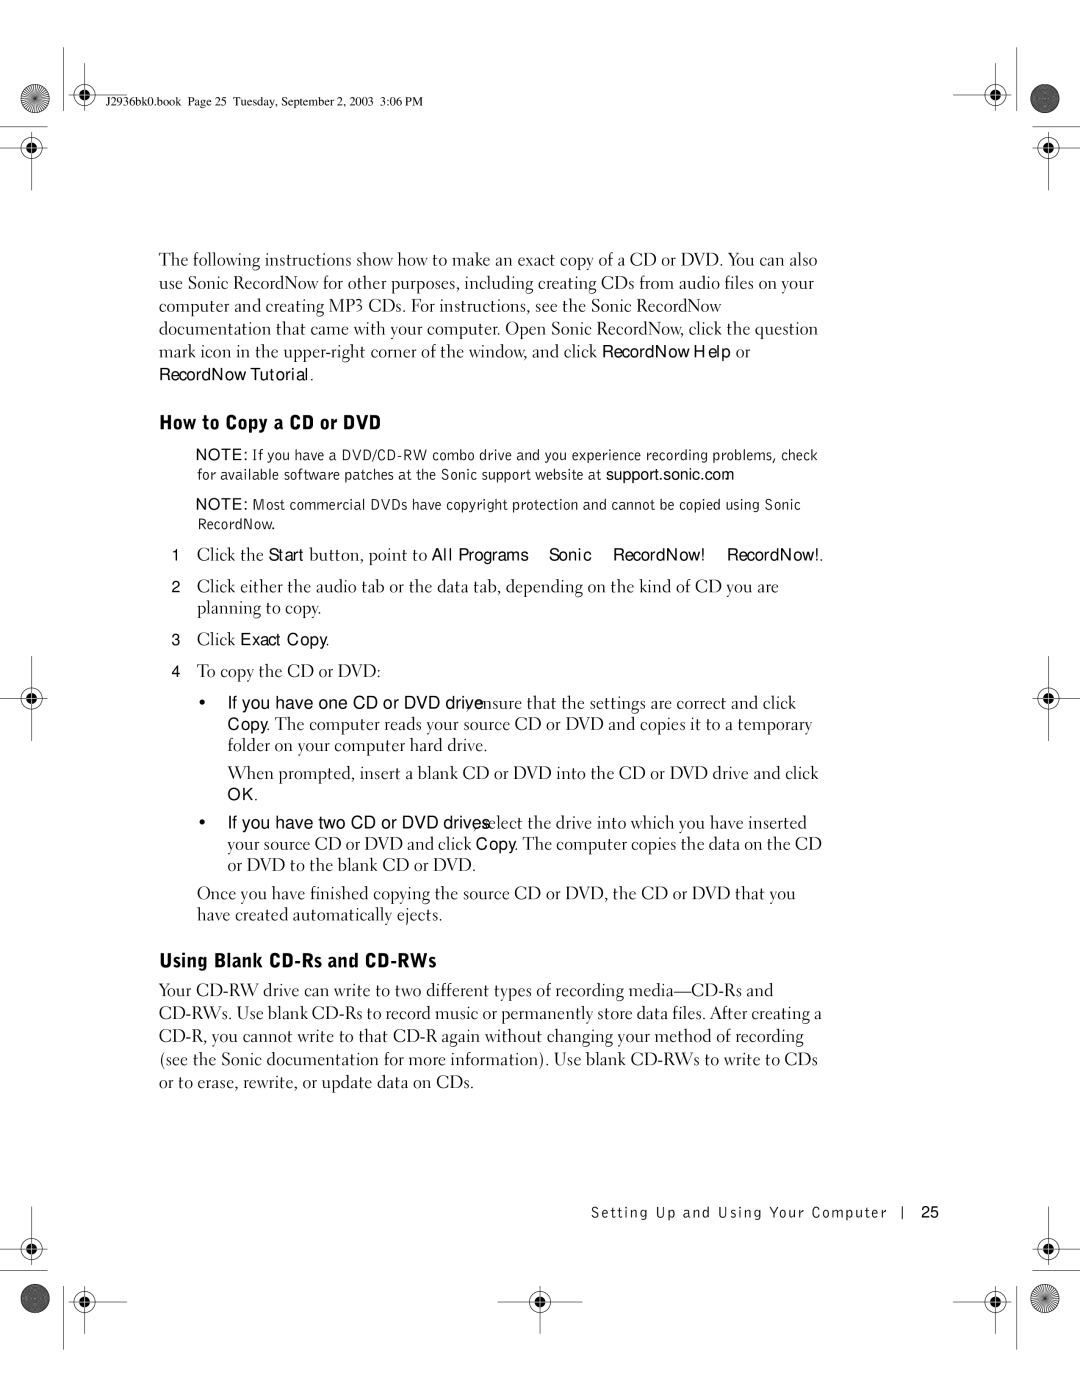 Dell J2936 manual How to Copy a CD or DVD, Using Blank CD-Rs and CD-RWs 